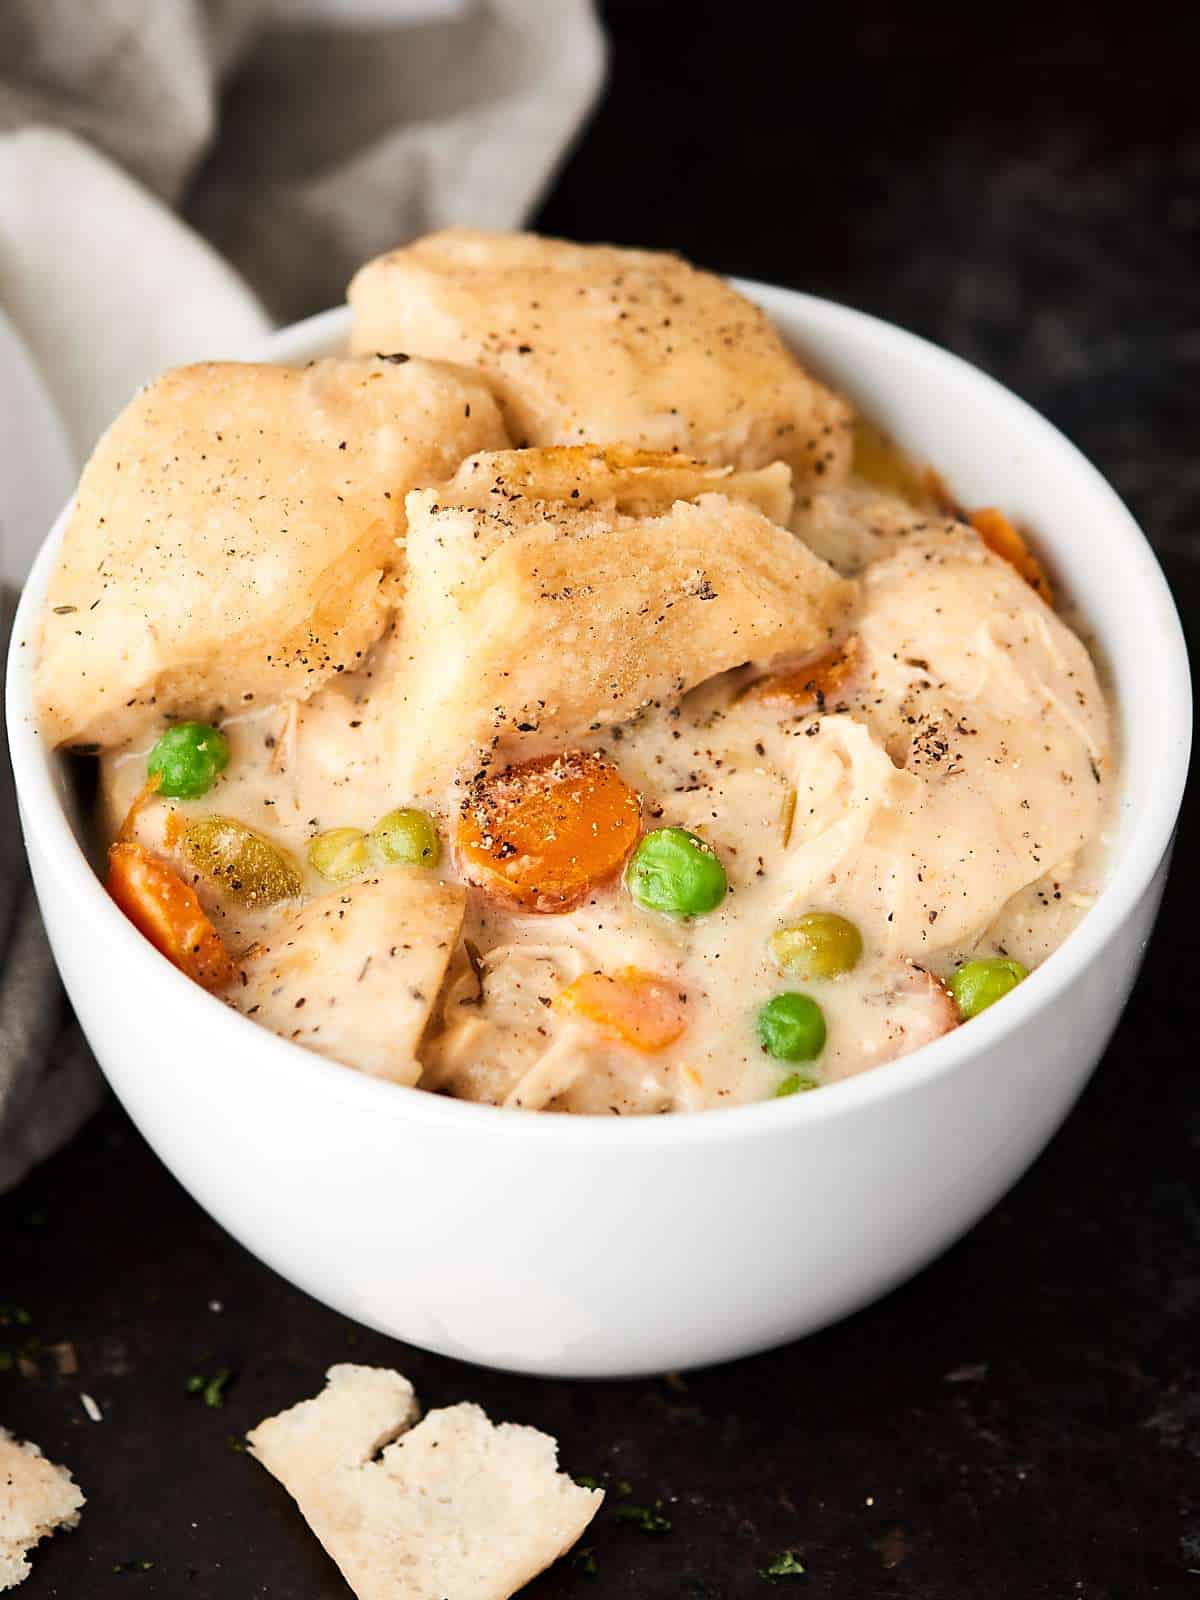 Crockpot Chicken and Dumplings Recipe - with Canned Biscuits